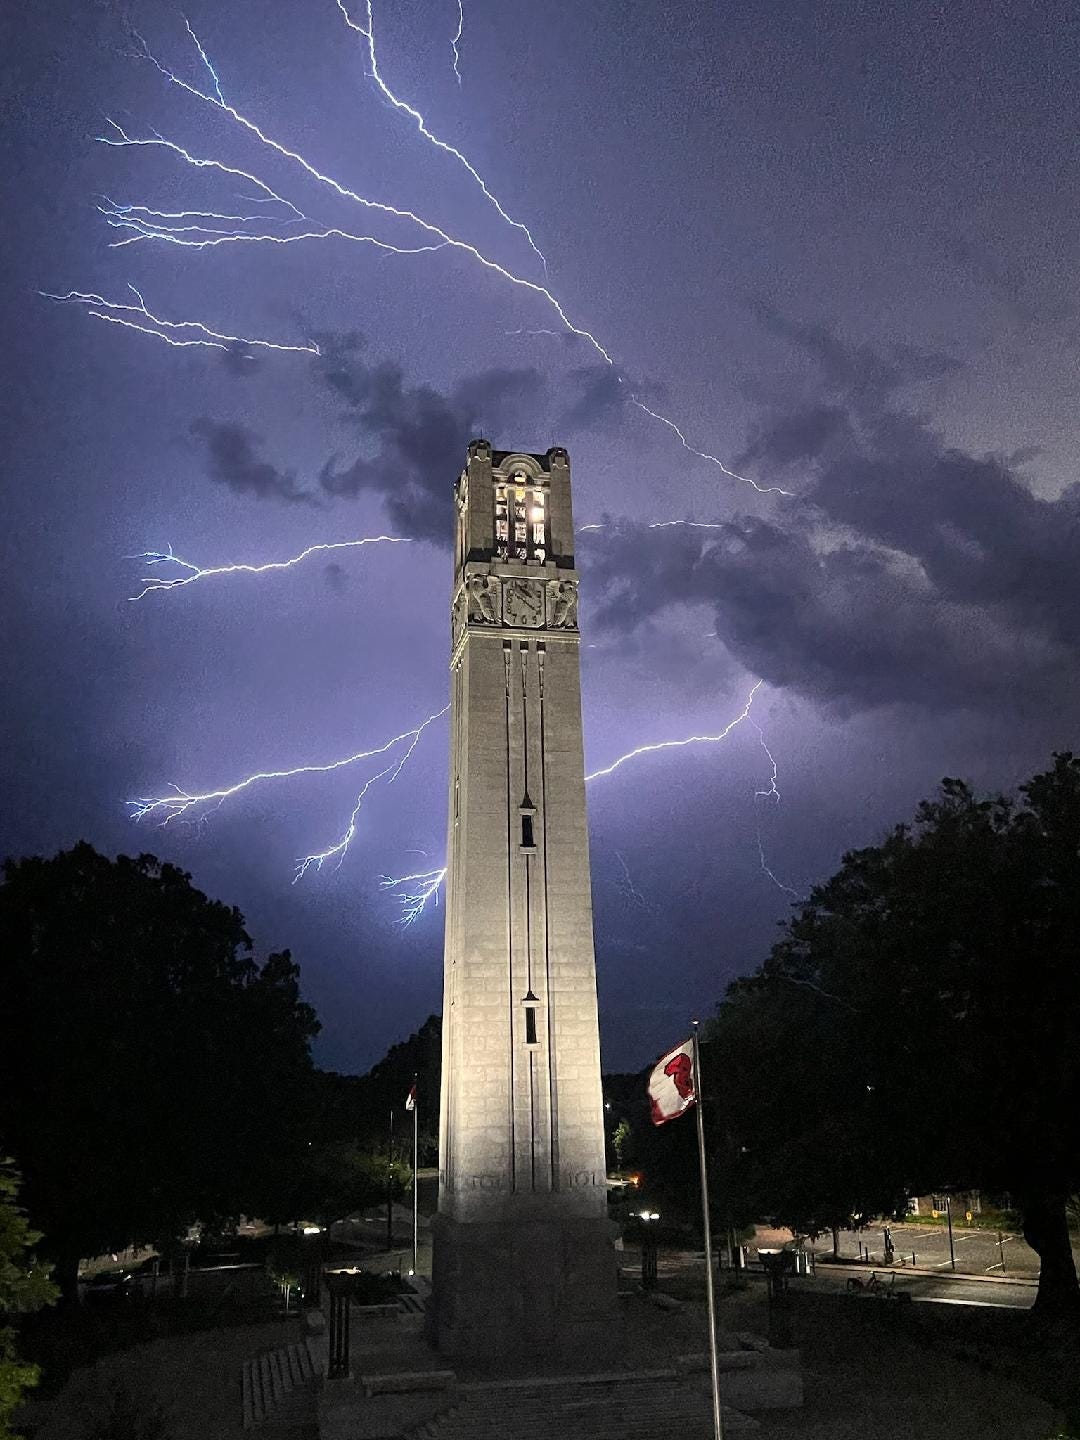 May be an image of bell tower, lightning and fireworks